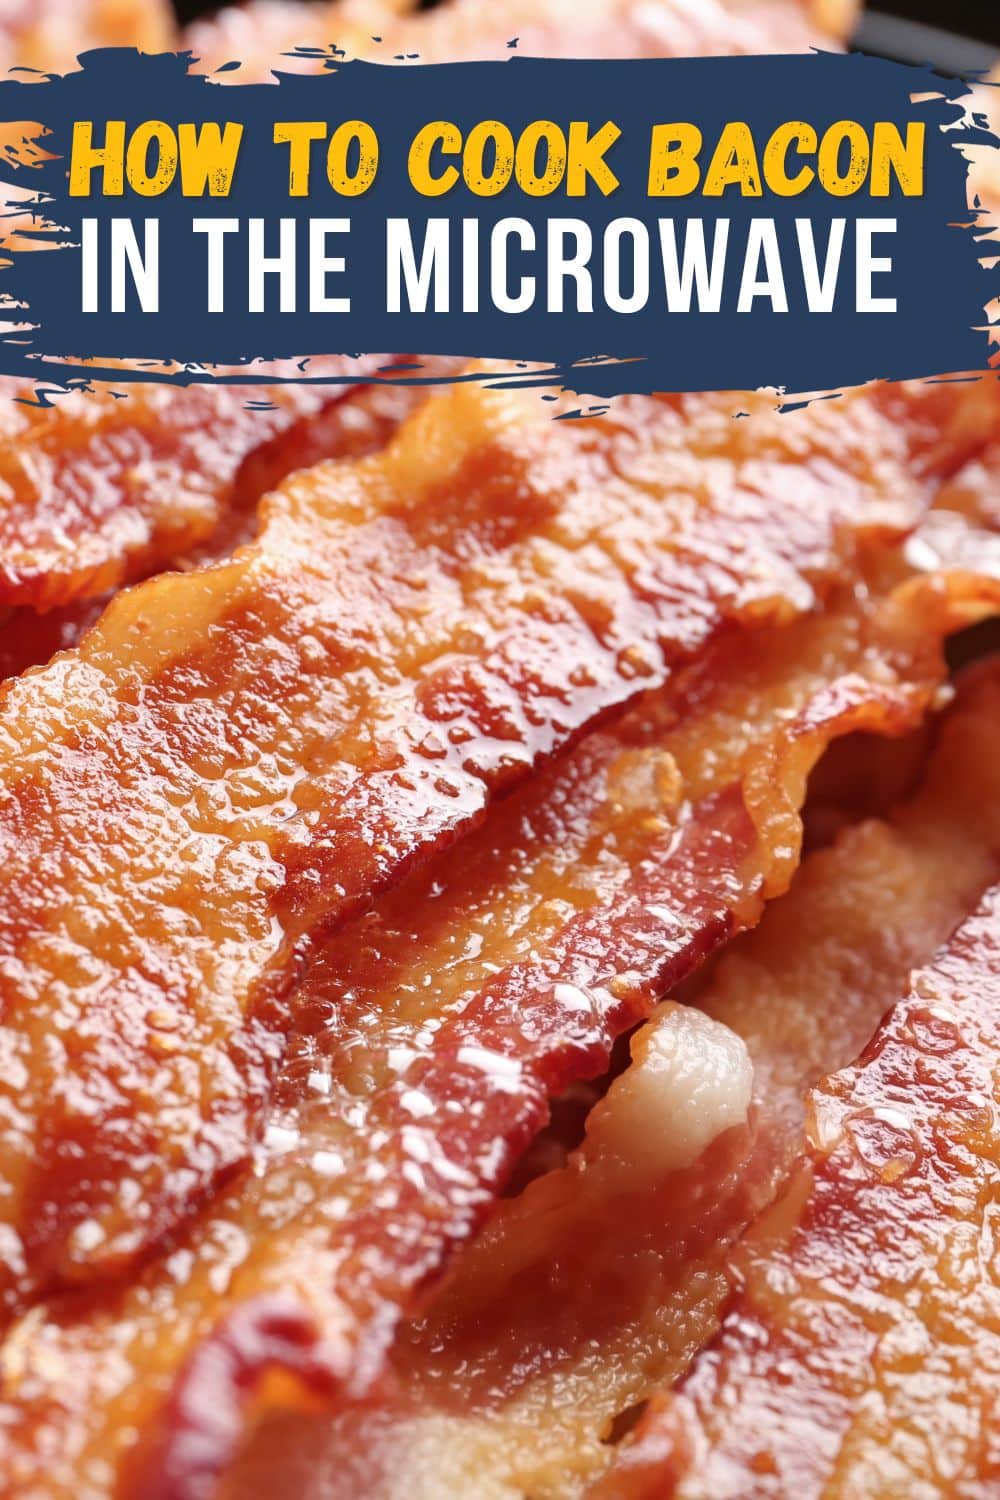 close up hero image of cooked bacon with text that says how to cook bacon in the microwave